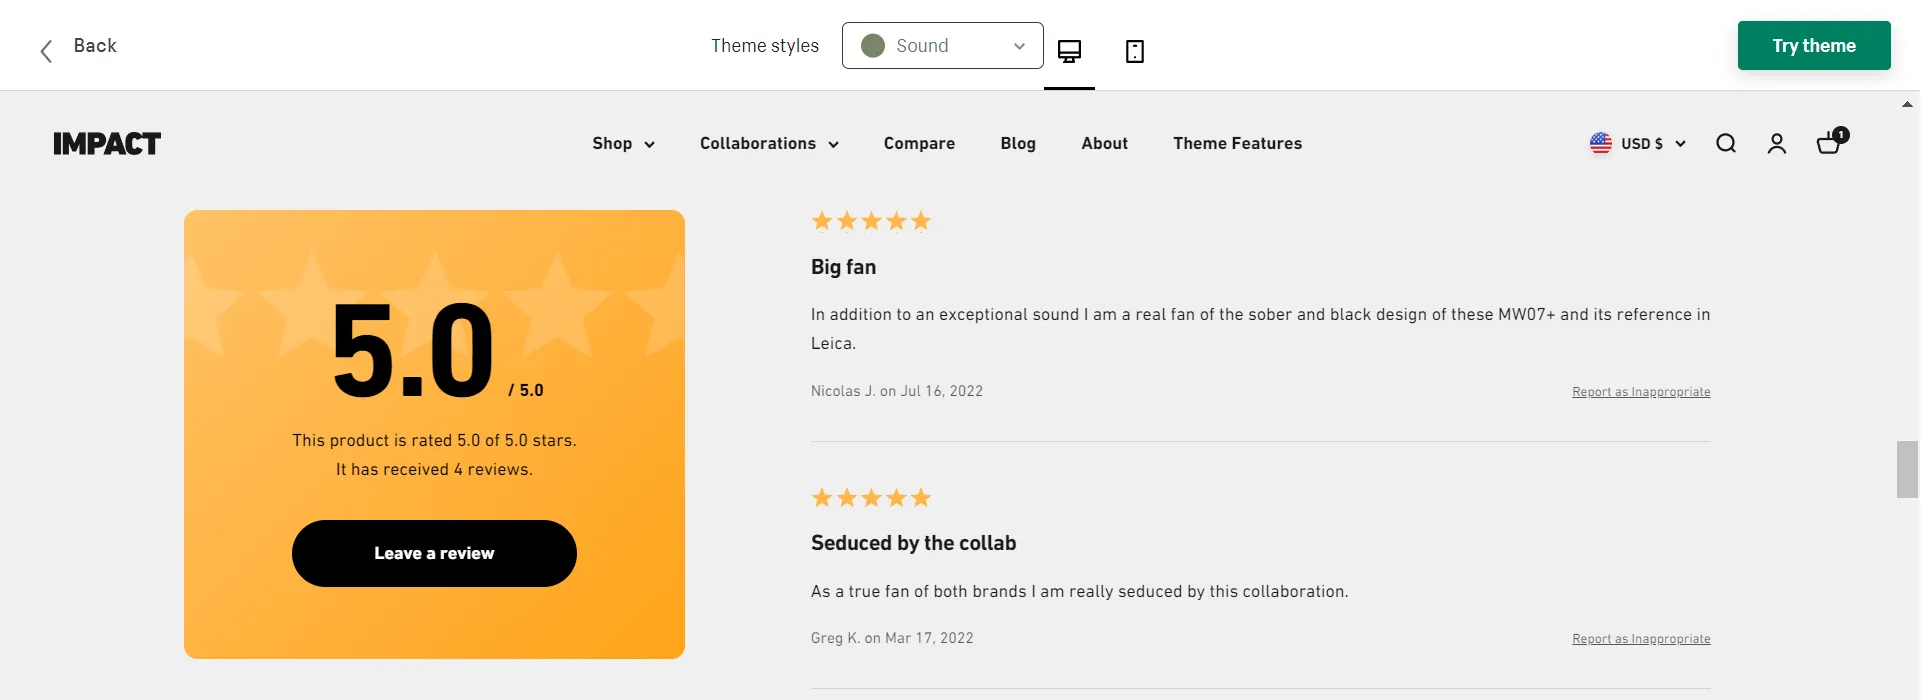 Demo of product reviews in Shopify themes.